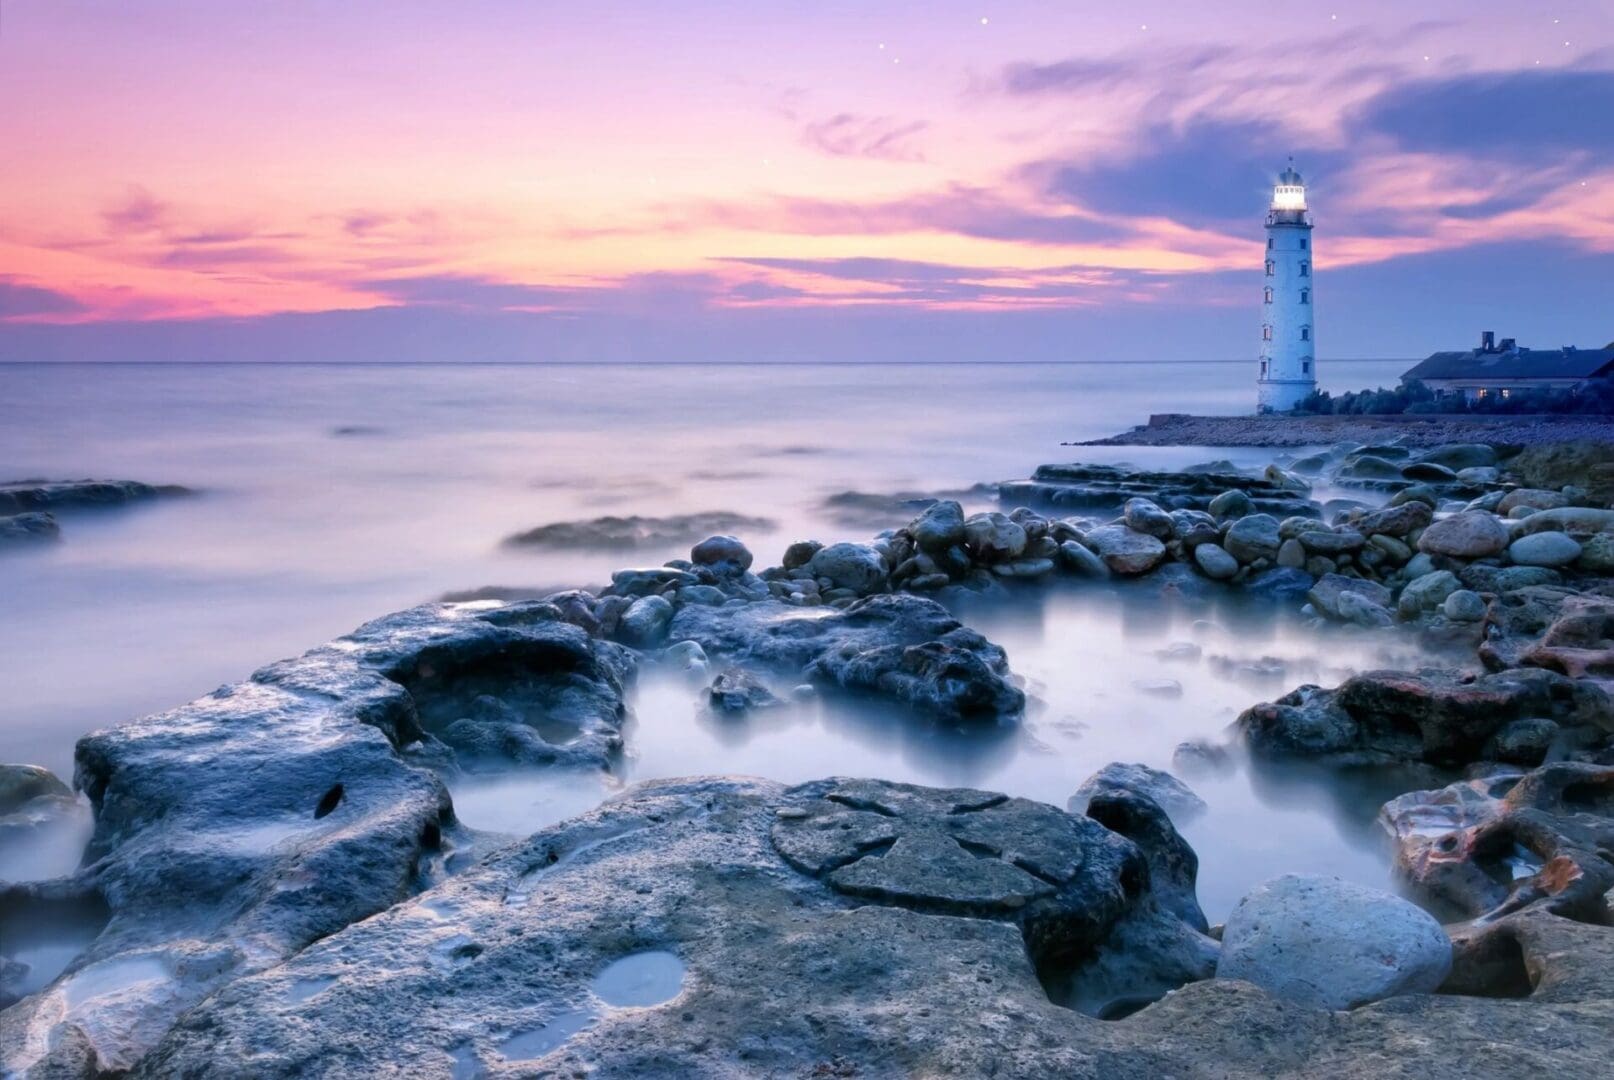 A lighthouse sits on a rocky shore at sunset.